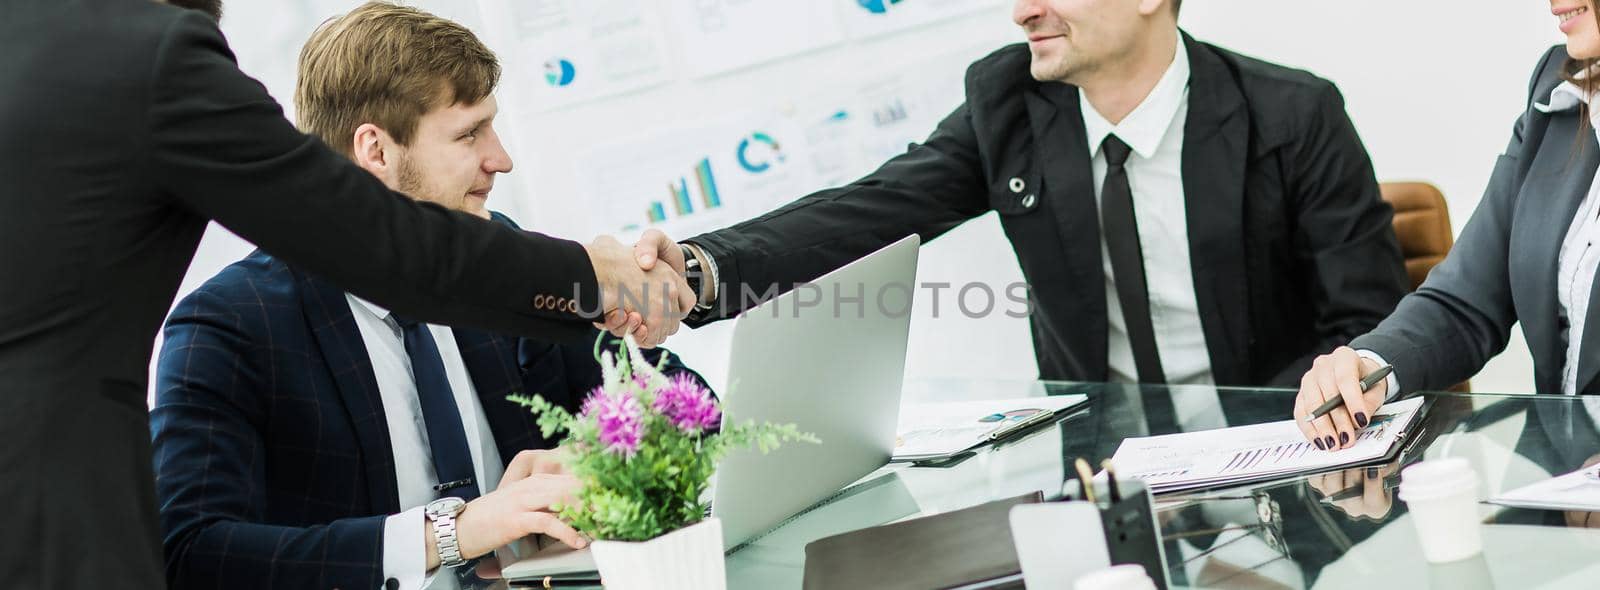 in the foreground - handshake of business partners after signing the contract in the workplace in a modern office.